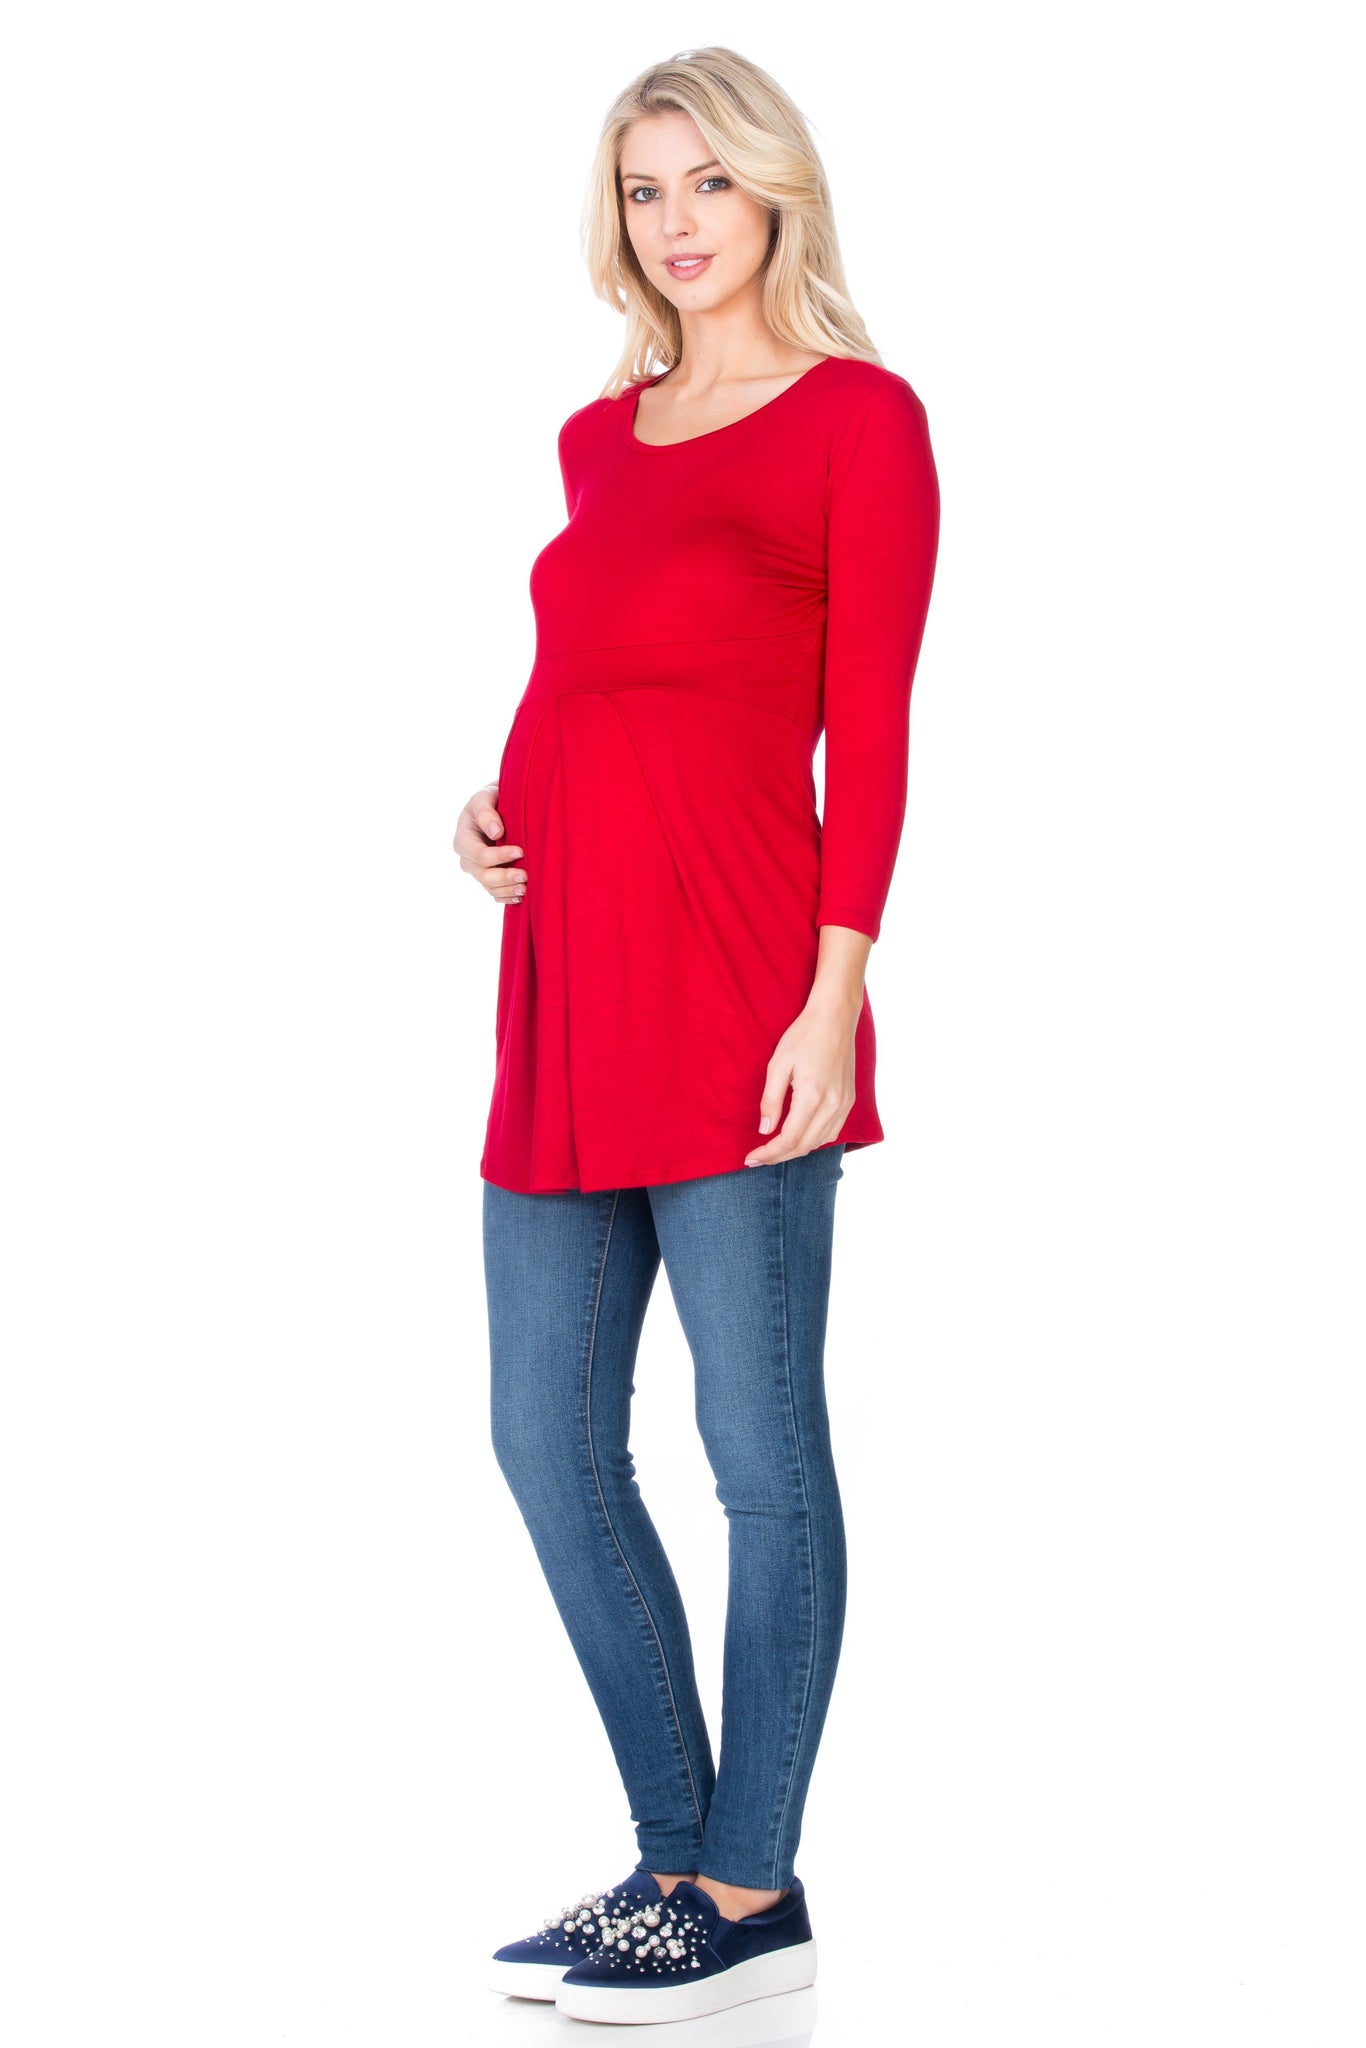 maternity pregnancy baby shower 3/4 long sleeve round neck crewneck pleated top shirt blouse